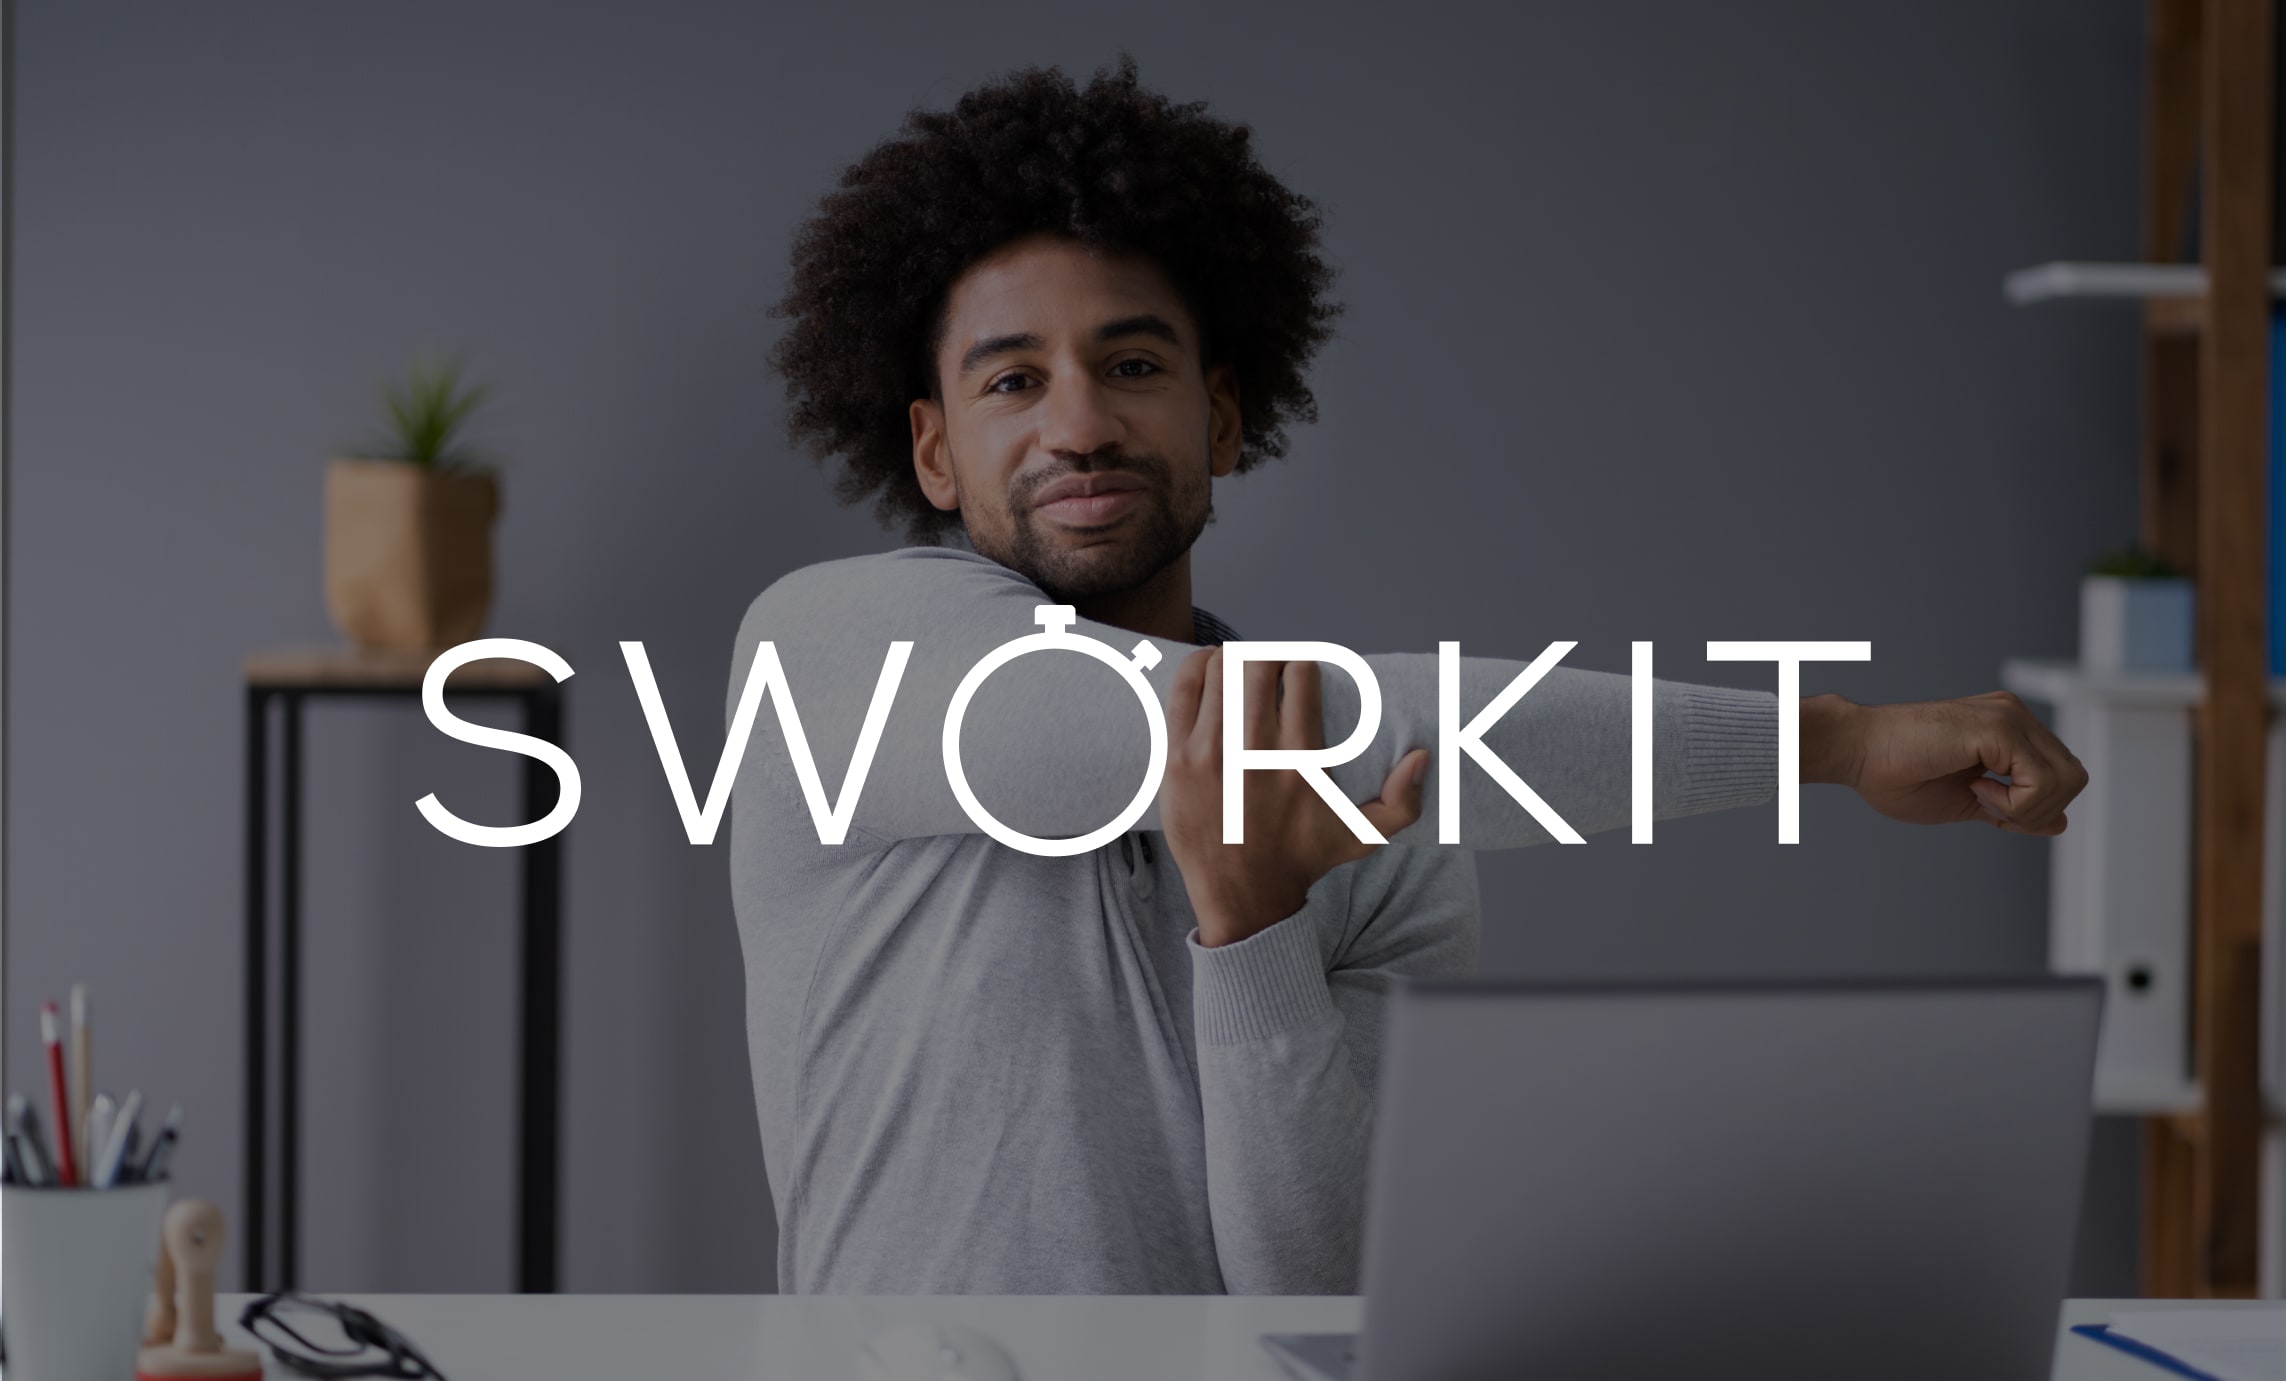 Sworkit-VP+graphic-with-logo-overlayed